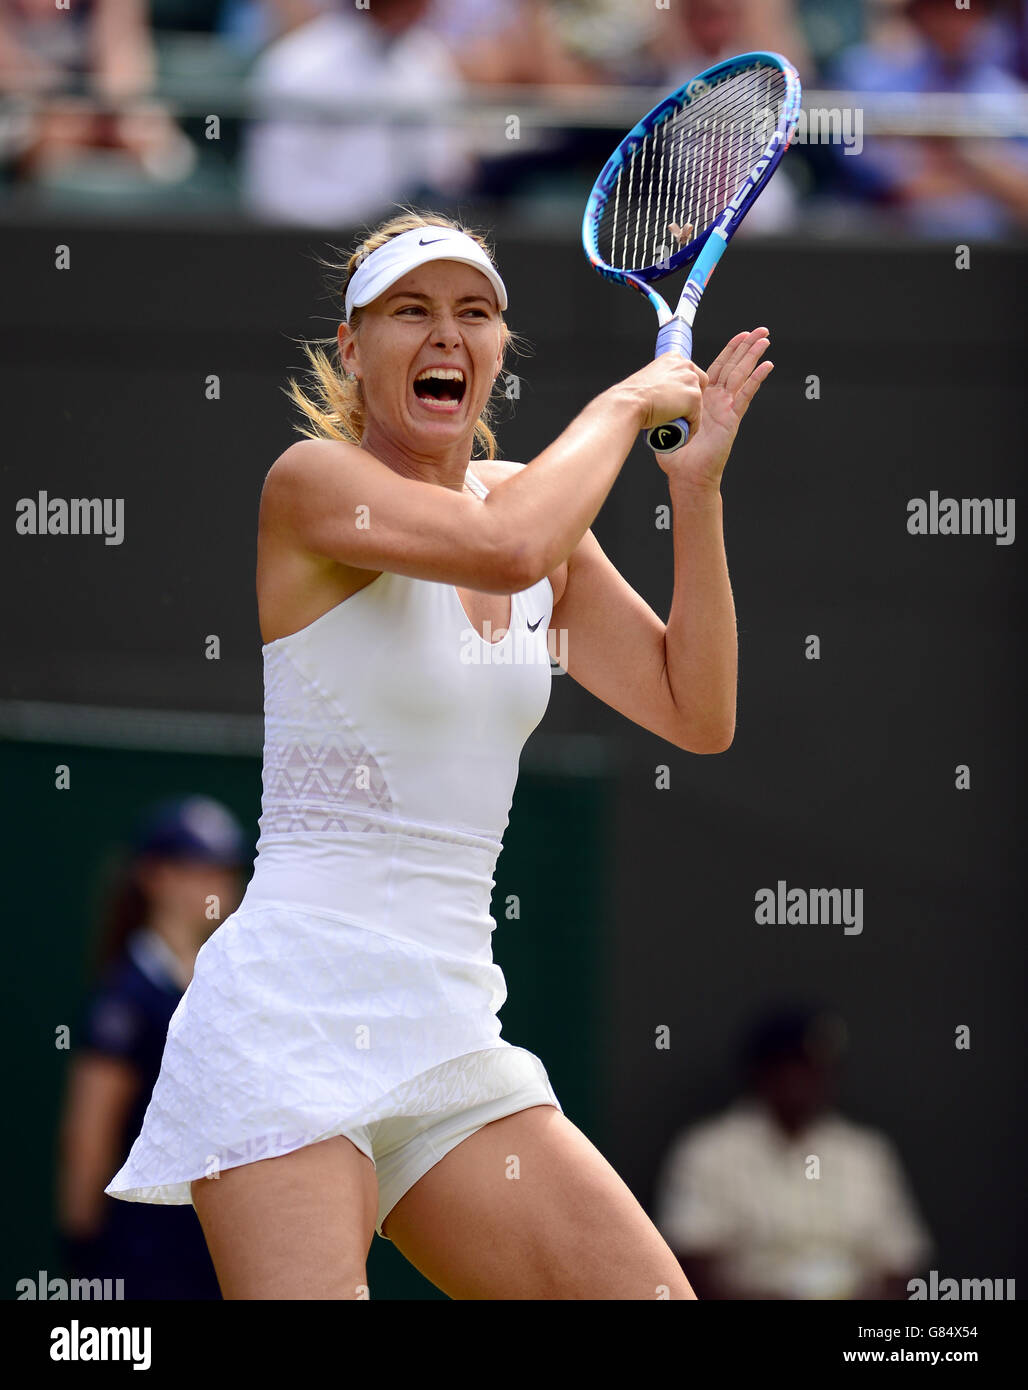 Maria Sharapova in action against Zarina Diyas during day Seven of the Wimbledon Championships at the All England Lawn Tennis and Croquet Club, Wimbledon. Stock Photo